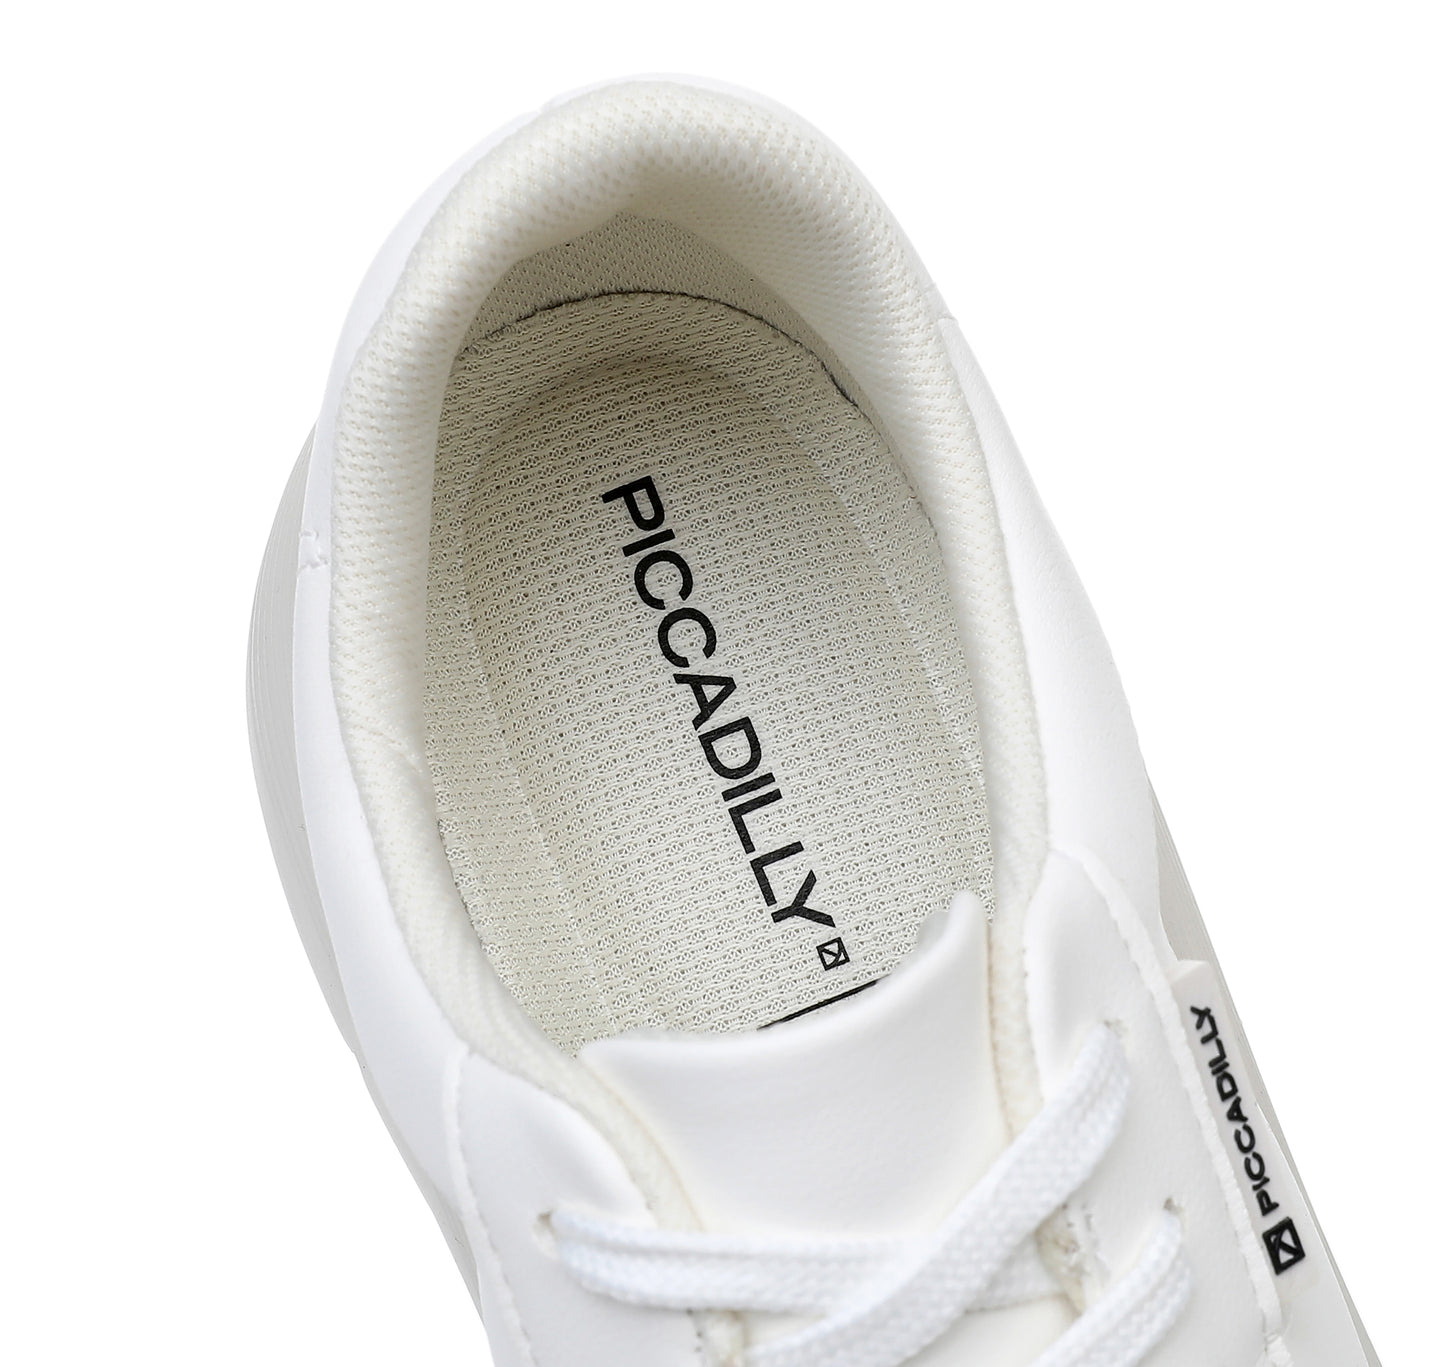 Everyday Essential Sneakers -White (936.007)